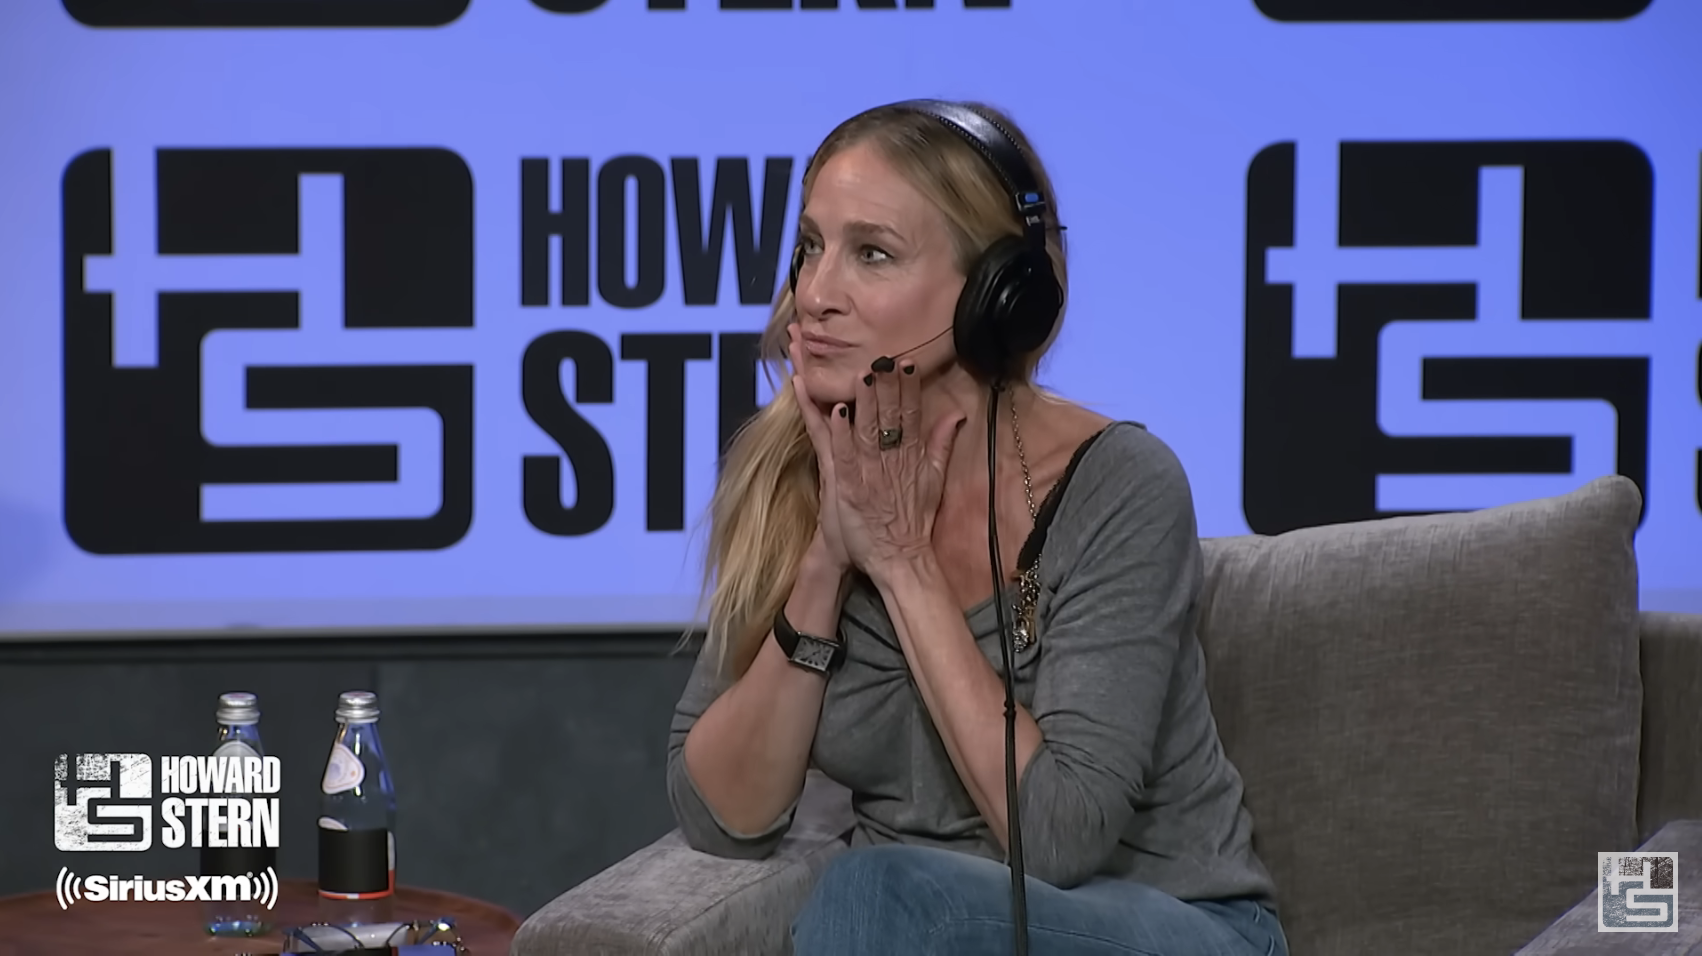 Close-up of SJP on the Howard Stern set, resting her chin in her hands